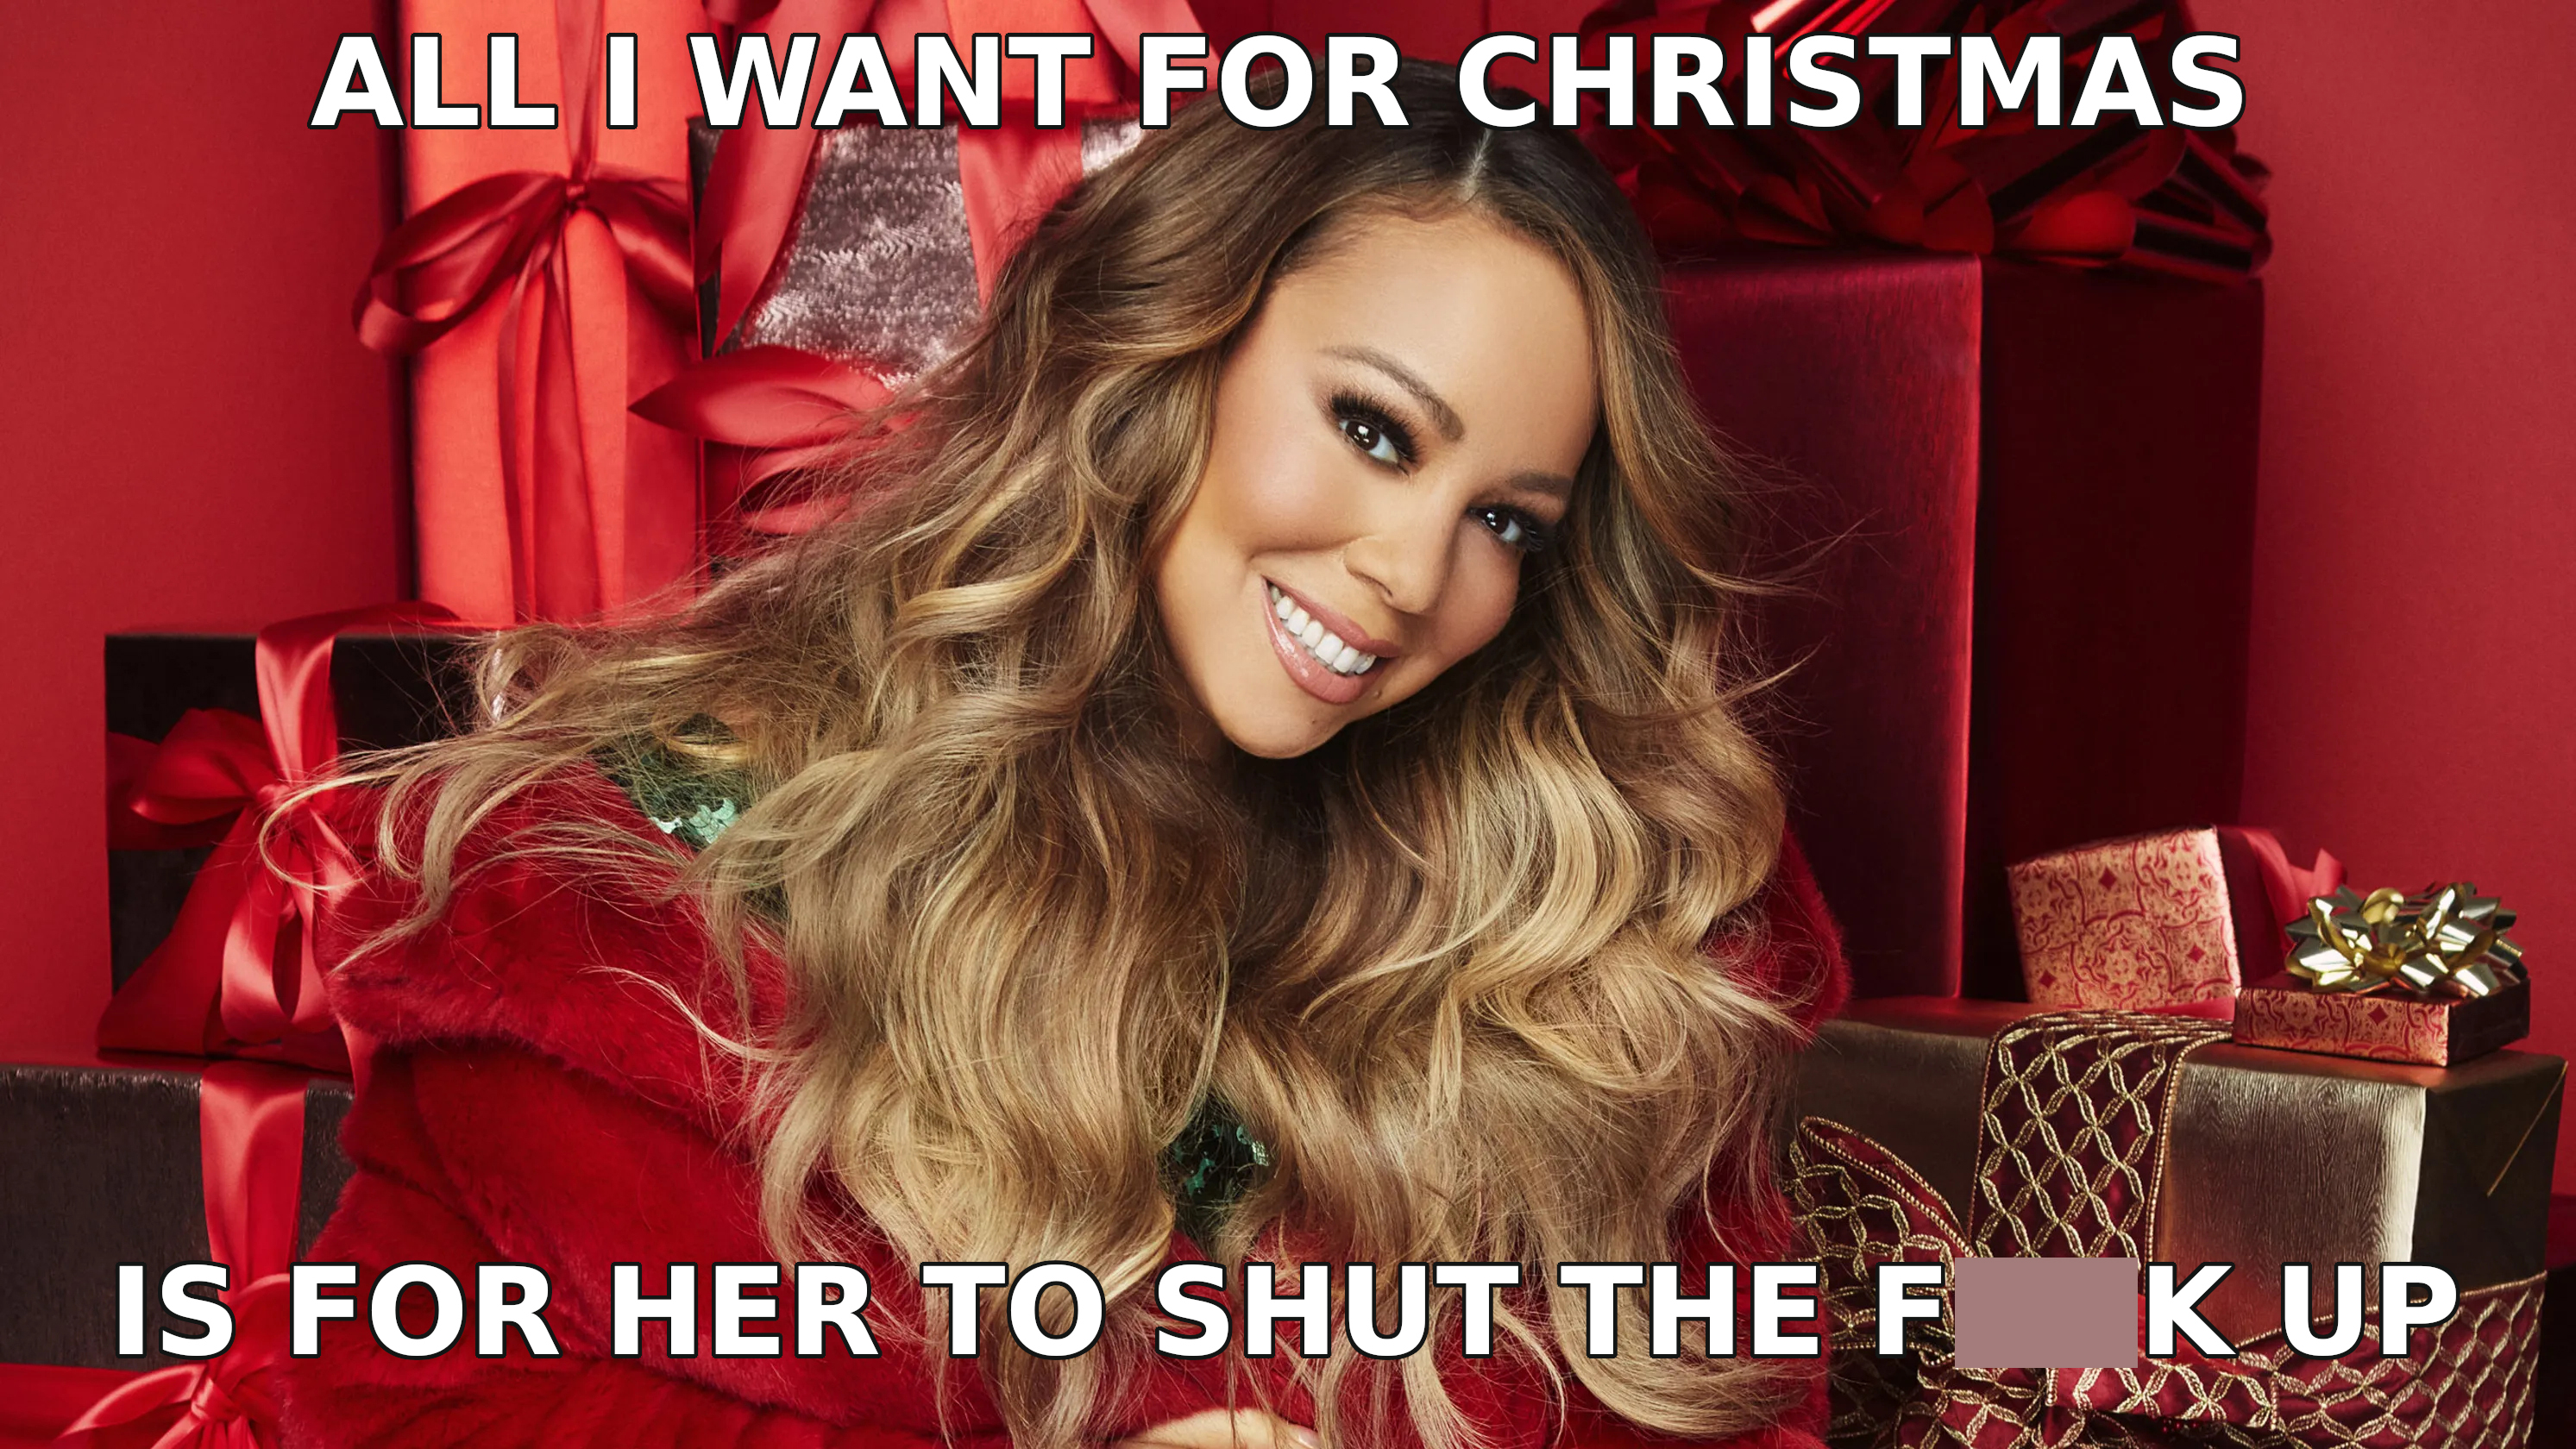 mariah carey loot crate - All I Want For Christmas Is For Her To Shut The F Kup